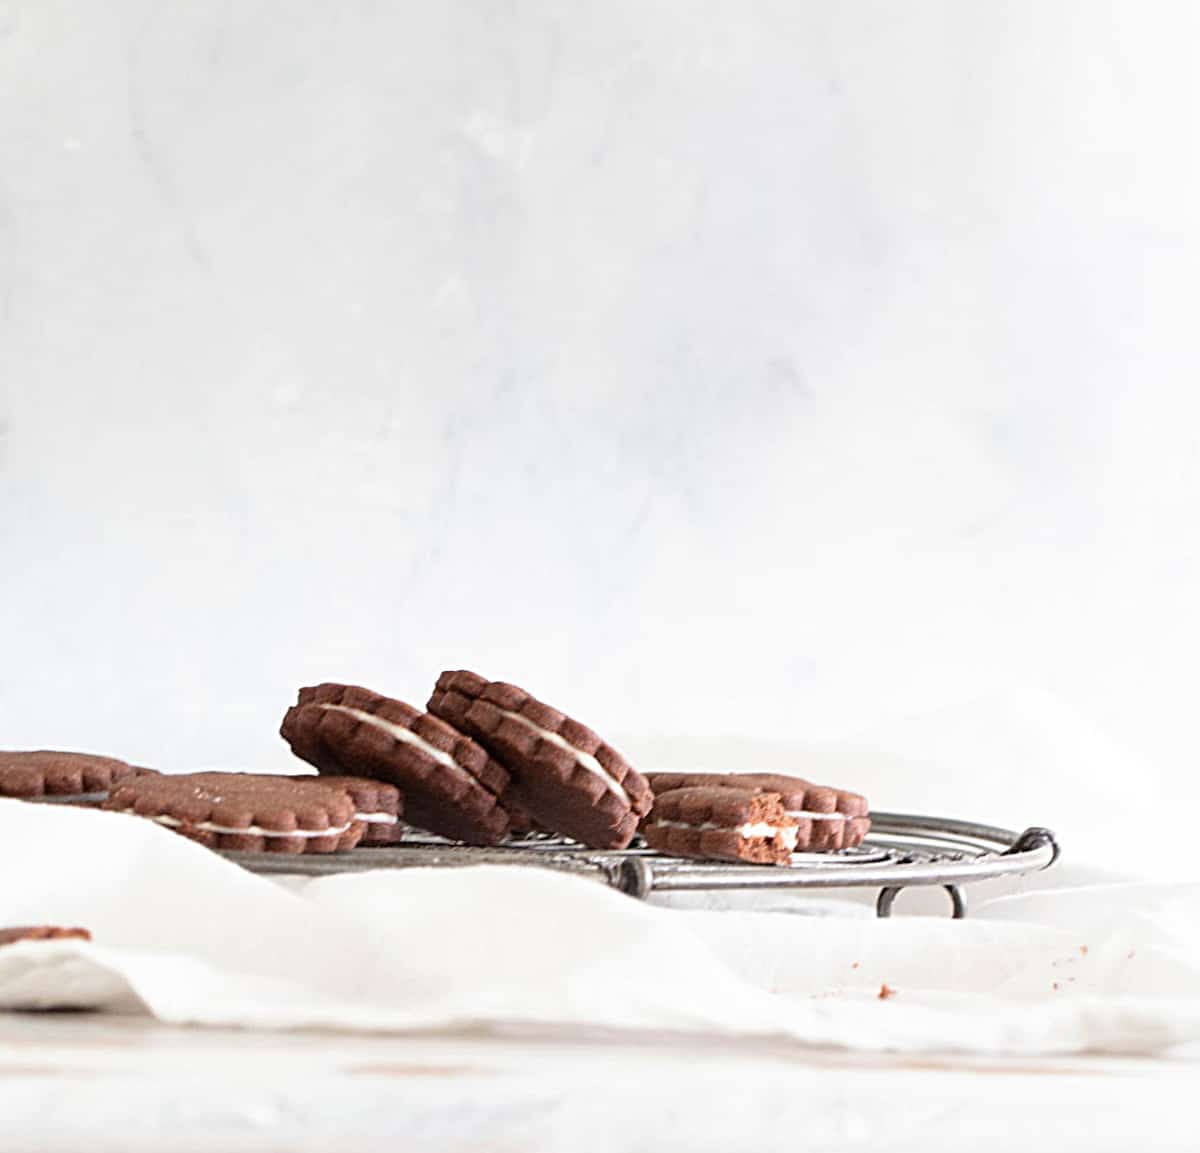 Several chocolate sandwich cookies on metal wire rack, white background